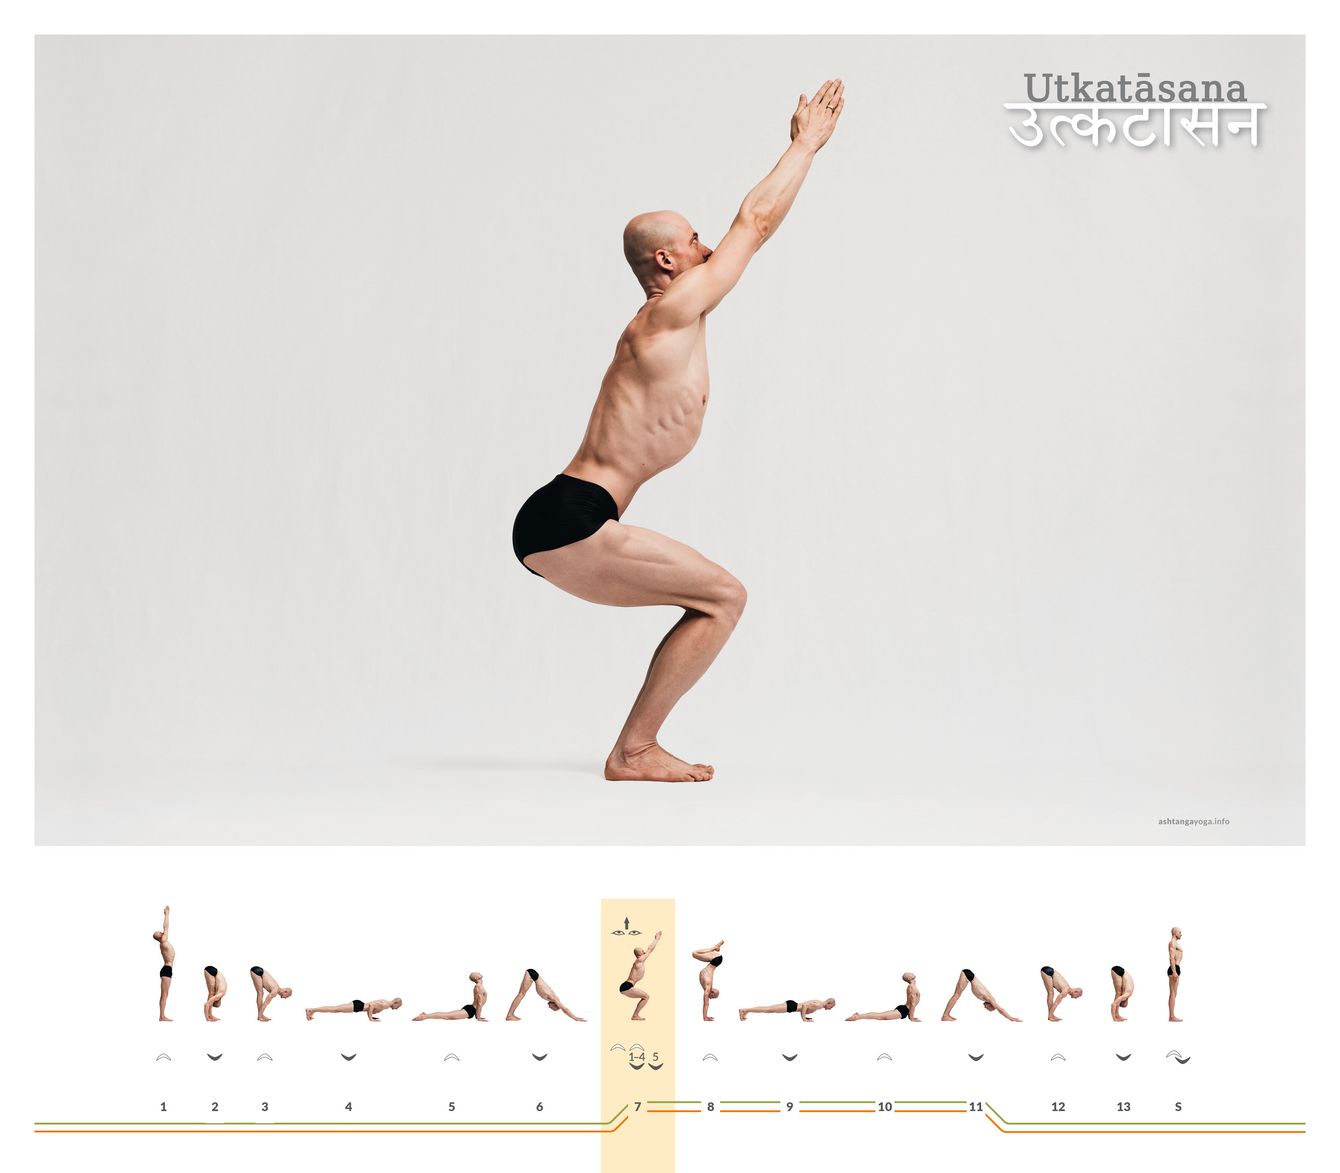 The „Intense Posture“ is a standing posture where the knees are bent in the same way as if you were to sit down on a chair. The arms lengthen powerfully toward the sky - Utkatasana. 